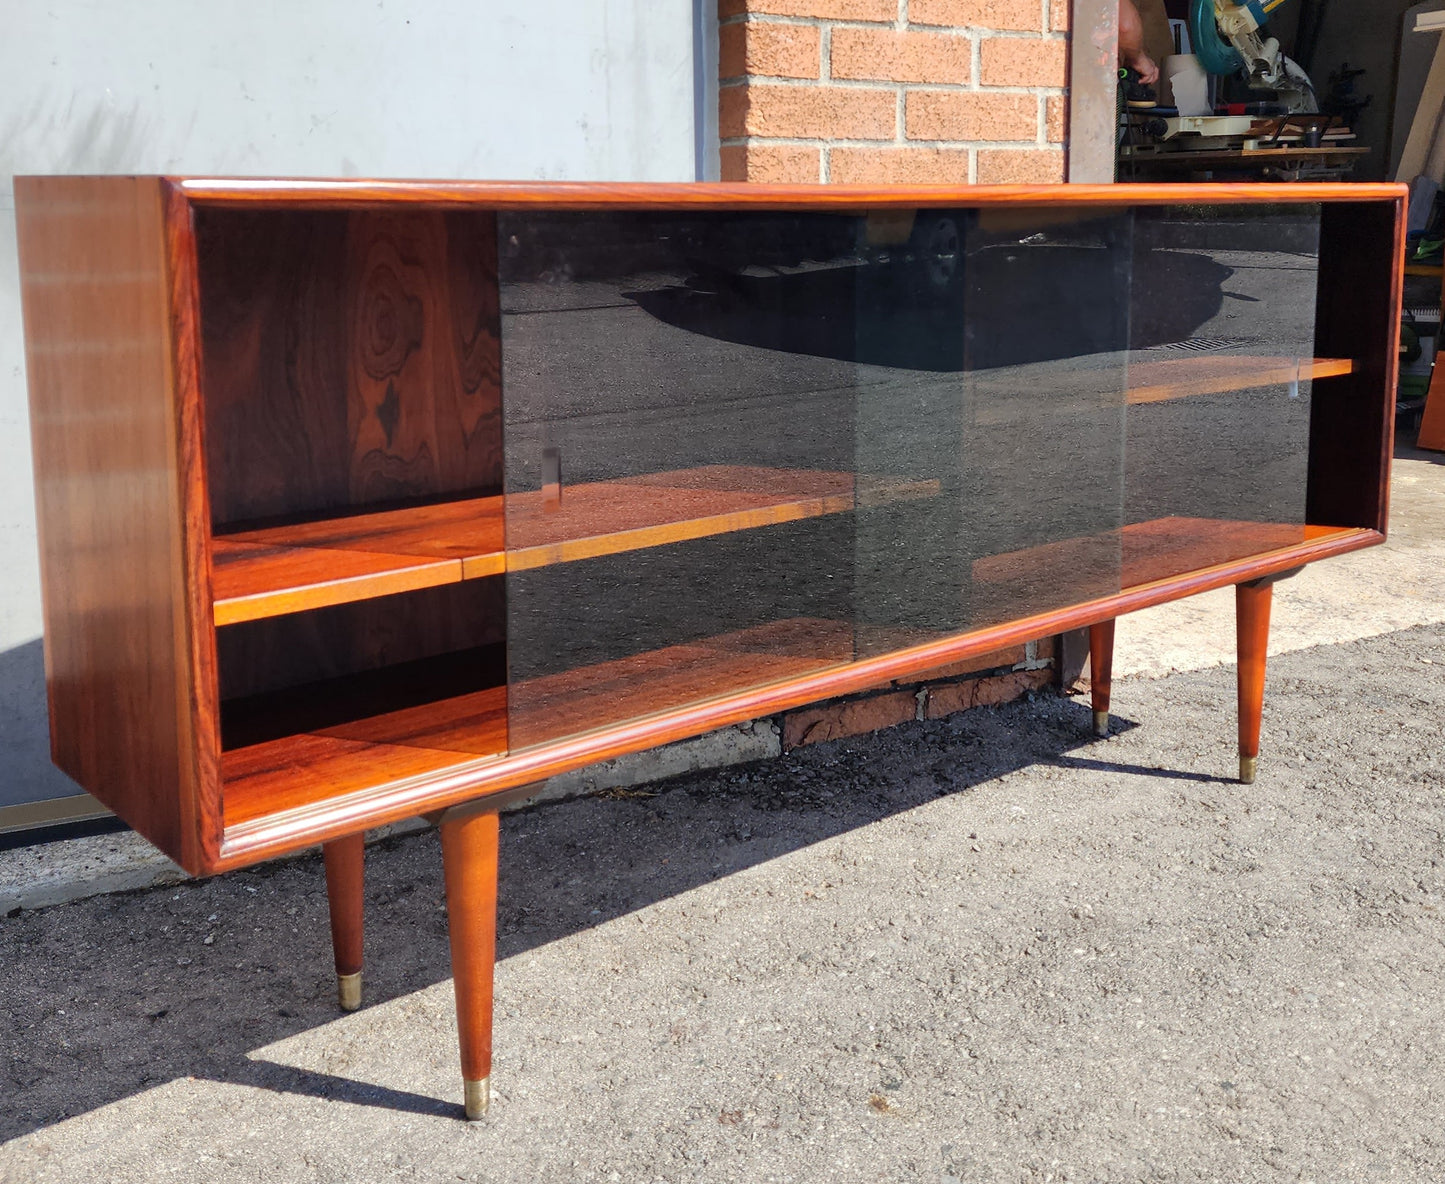 REFINISHED Danish Mid Century Modern Rosewood Display 59" by A. Christensen